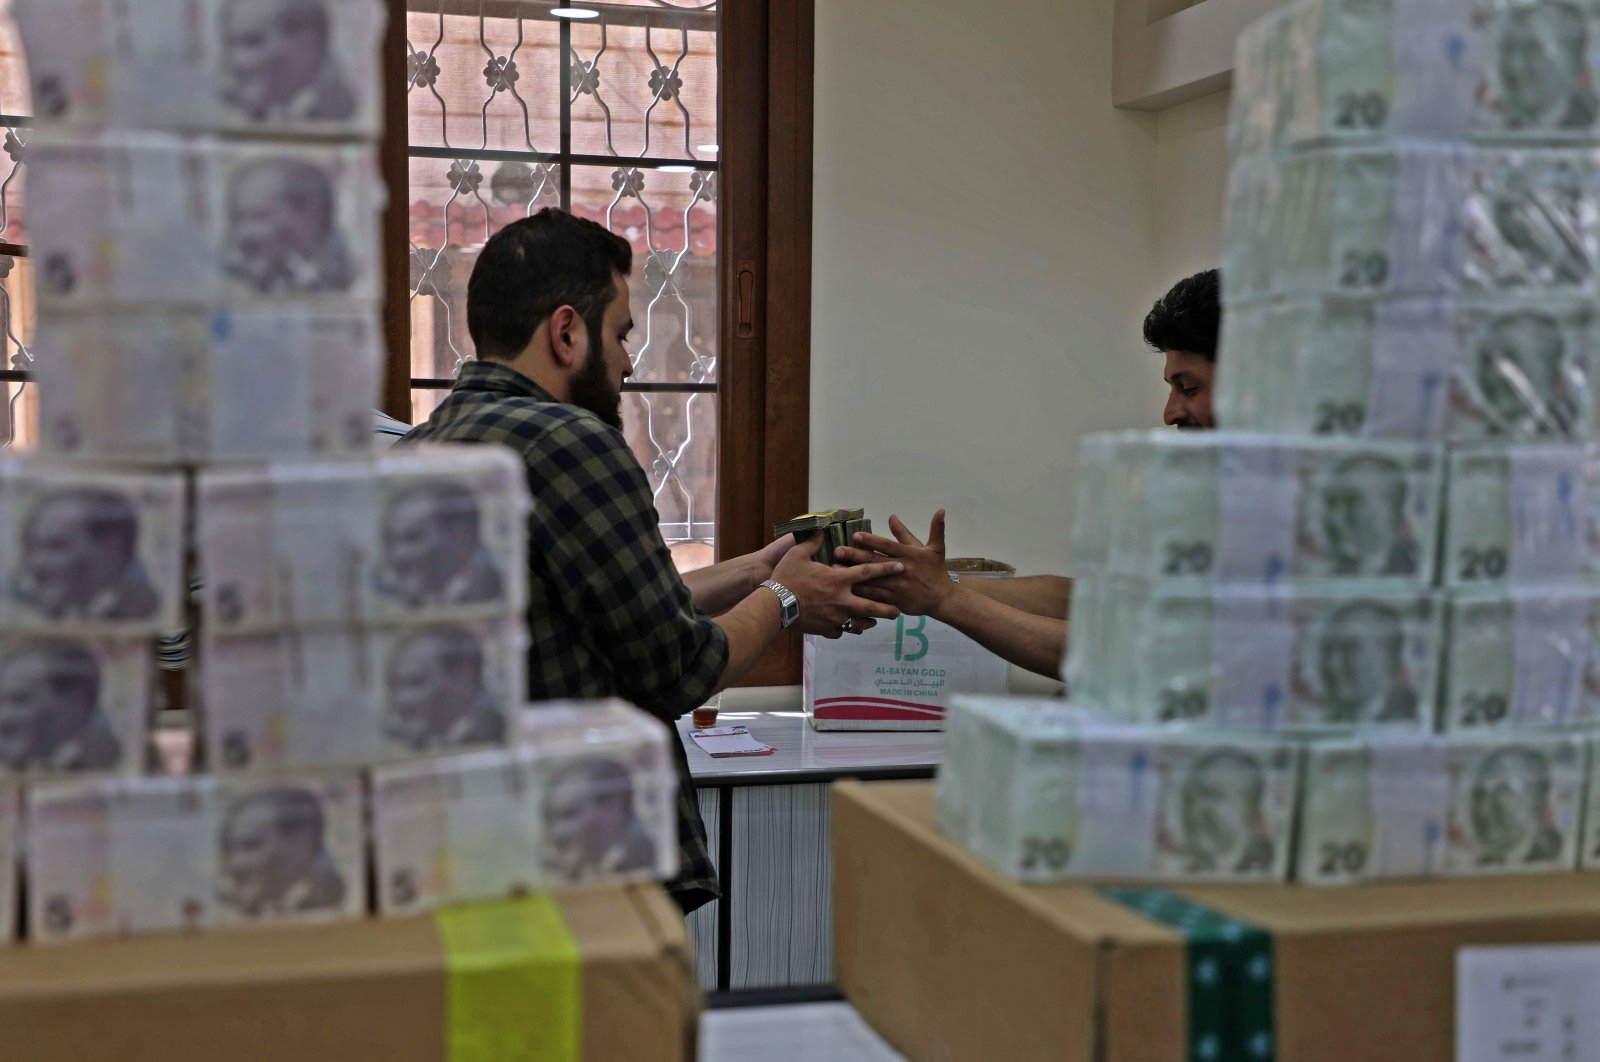 Employees sort Turkish lira banknotes at a bank in the town of Sarmada in Syria's northwestern Idlib province, June 14, 2020. (AFP Photo)